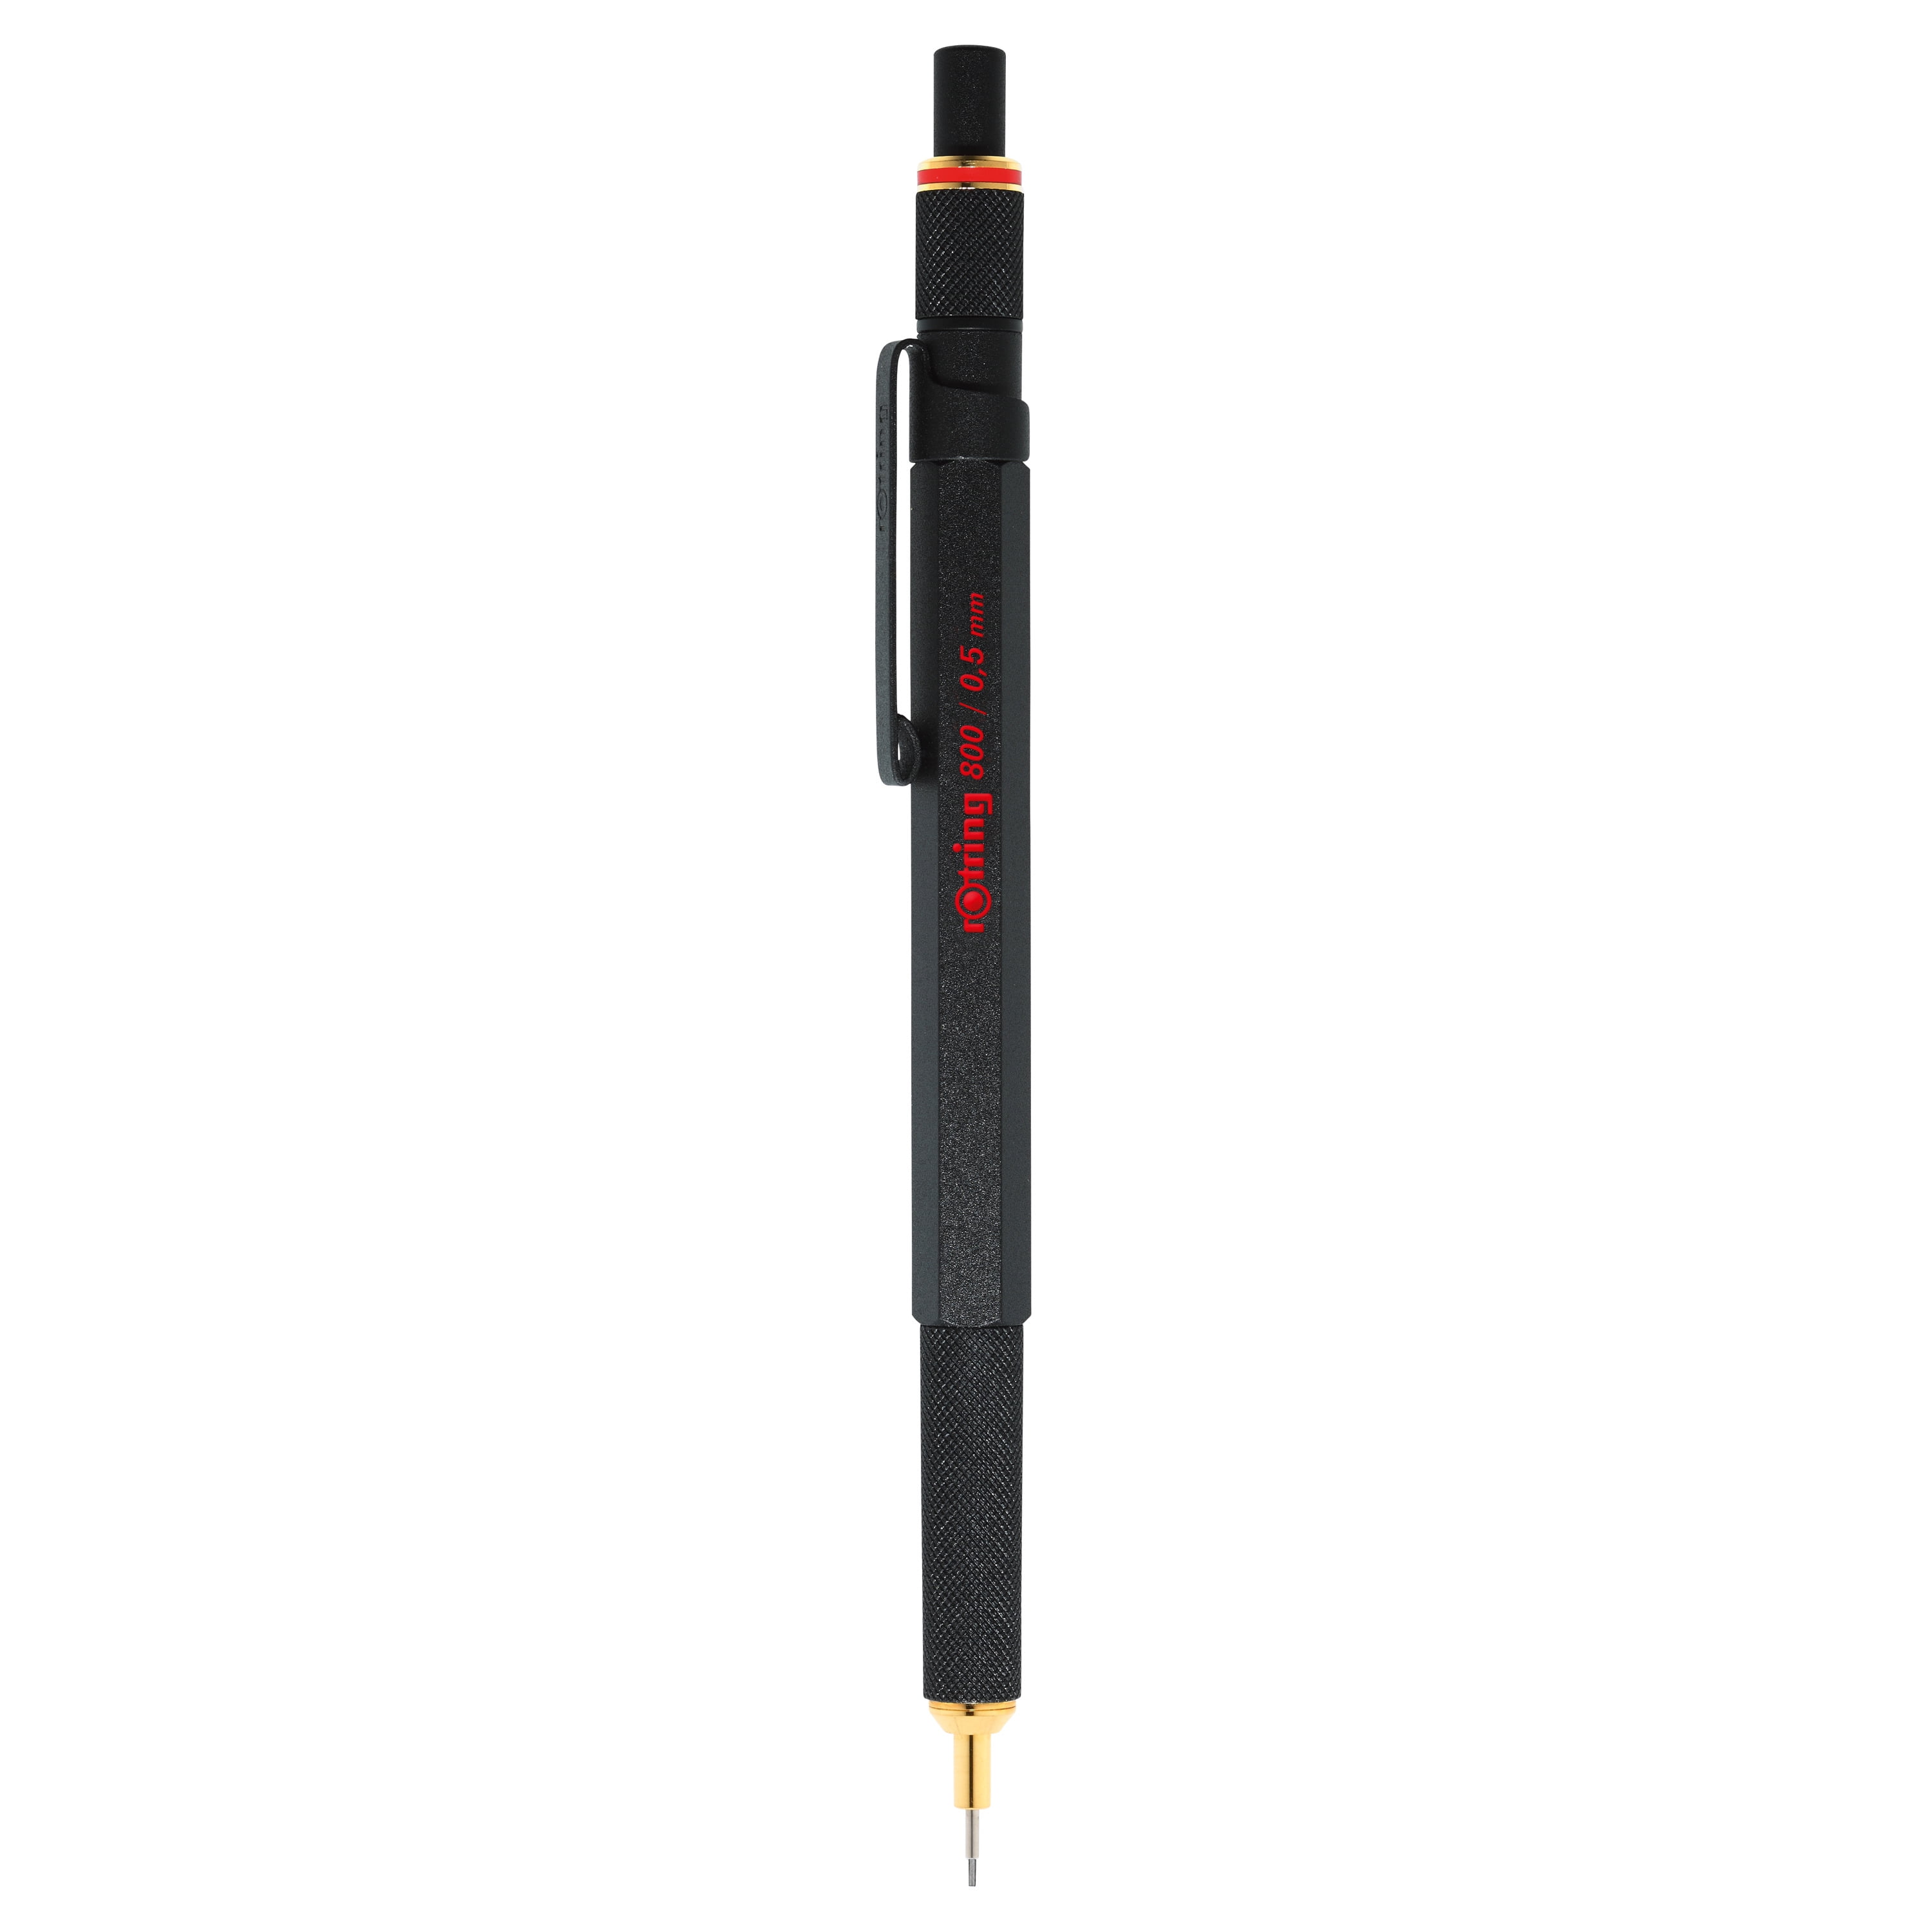 NEW rOtring 800 0.7 mm Silver Barrel Mechanical Pencil and Touchscreen Stylus 